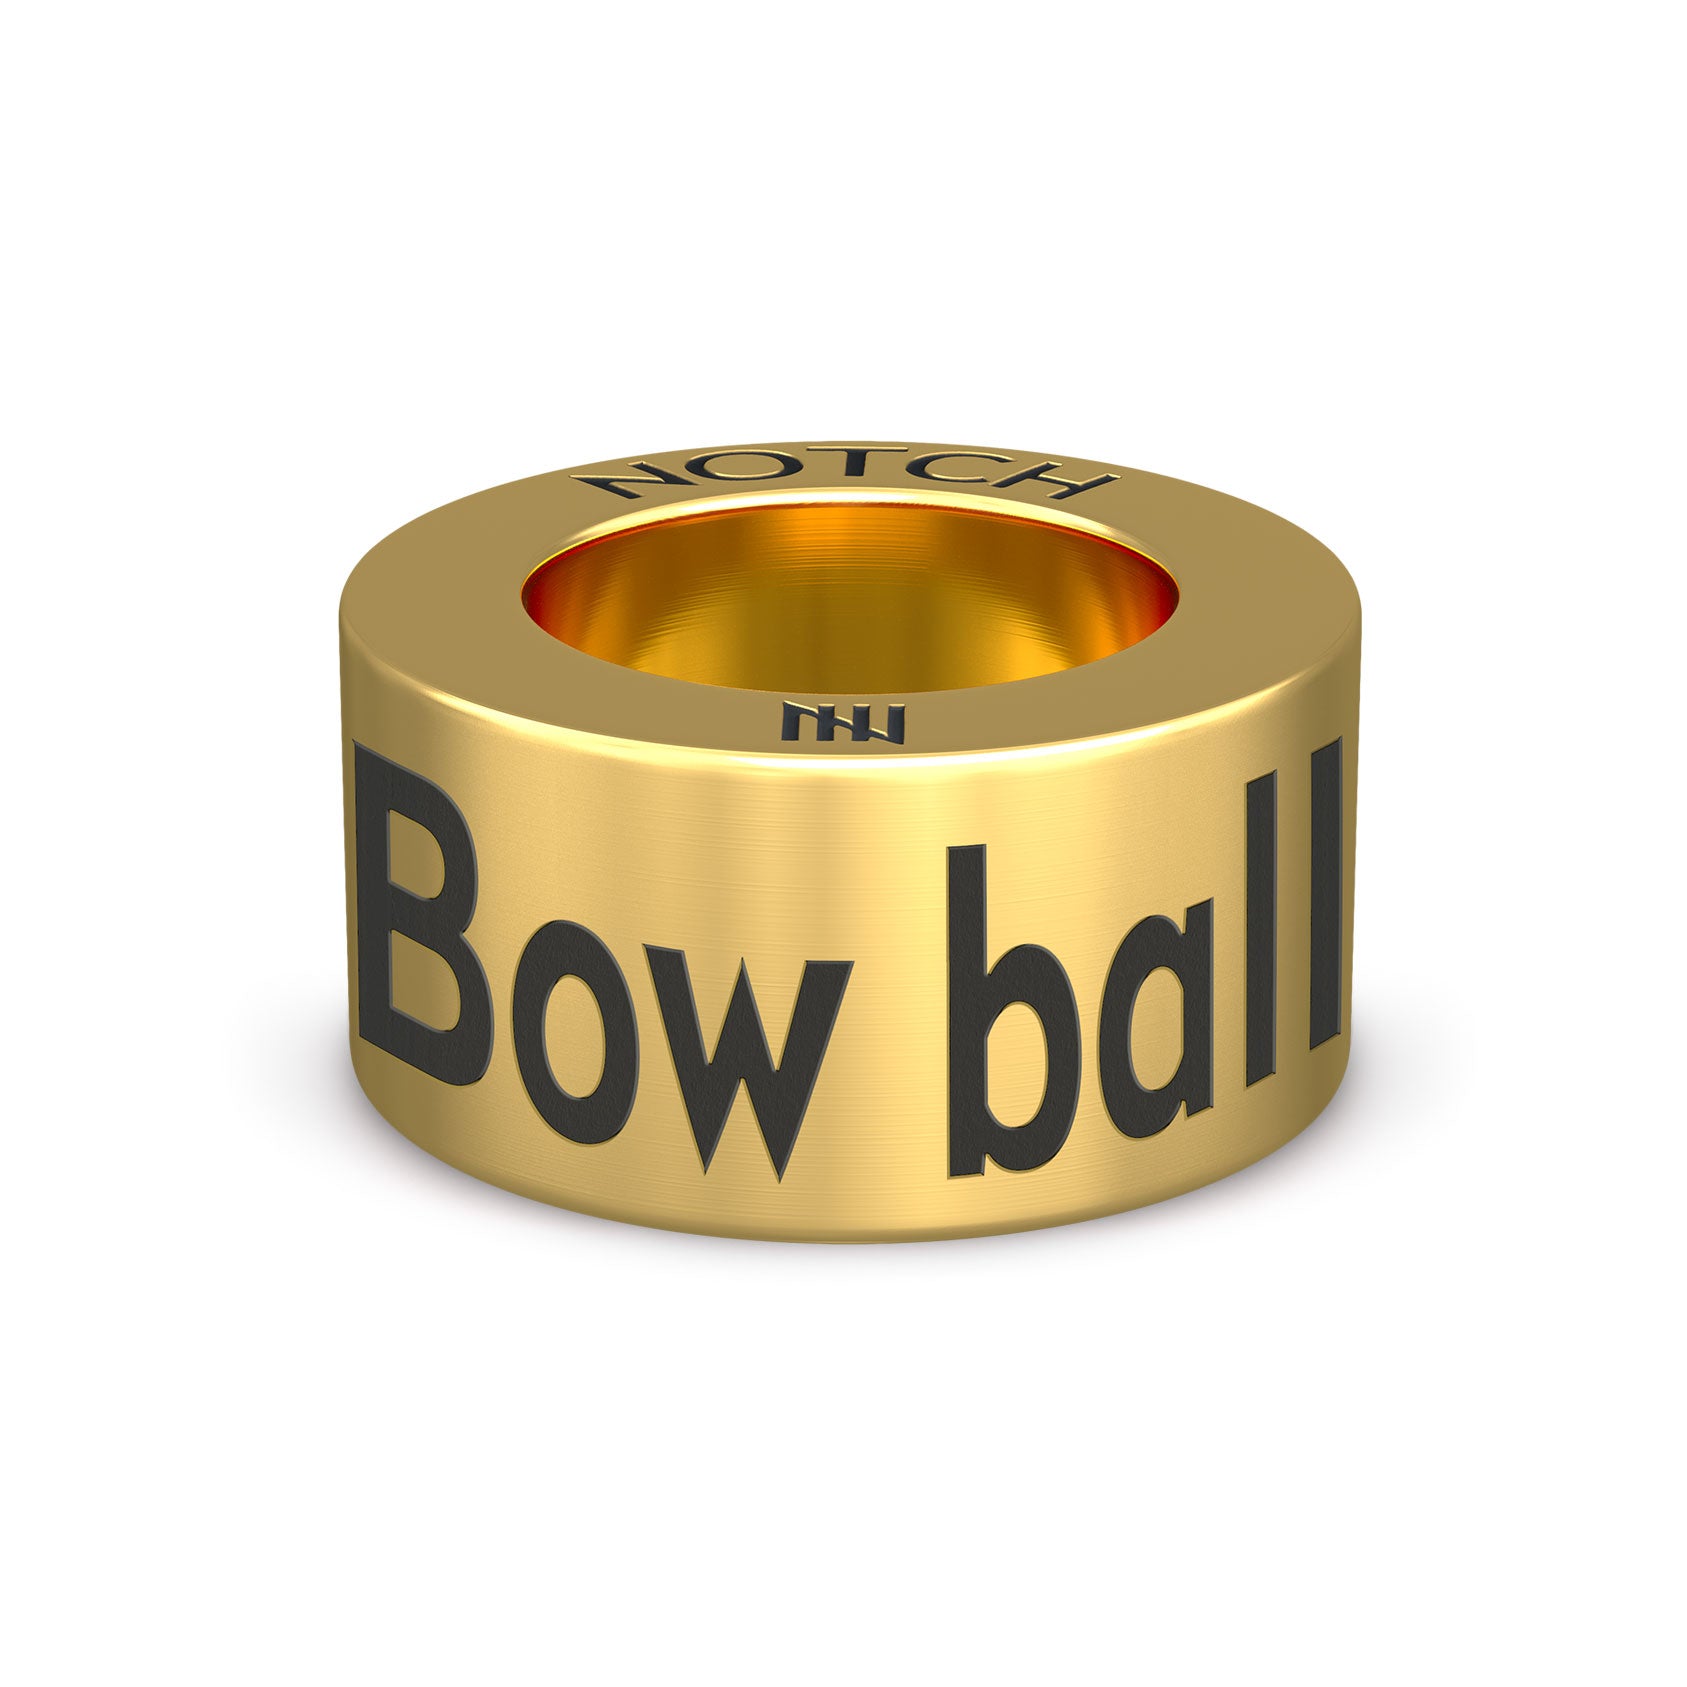 Bow ball to Bow ball! NOTCH Charm